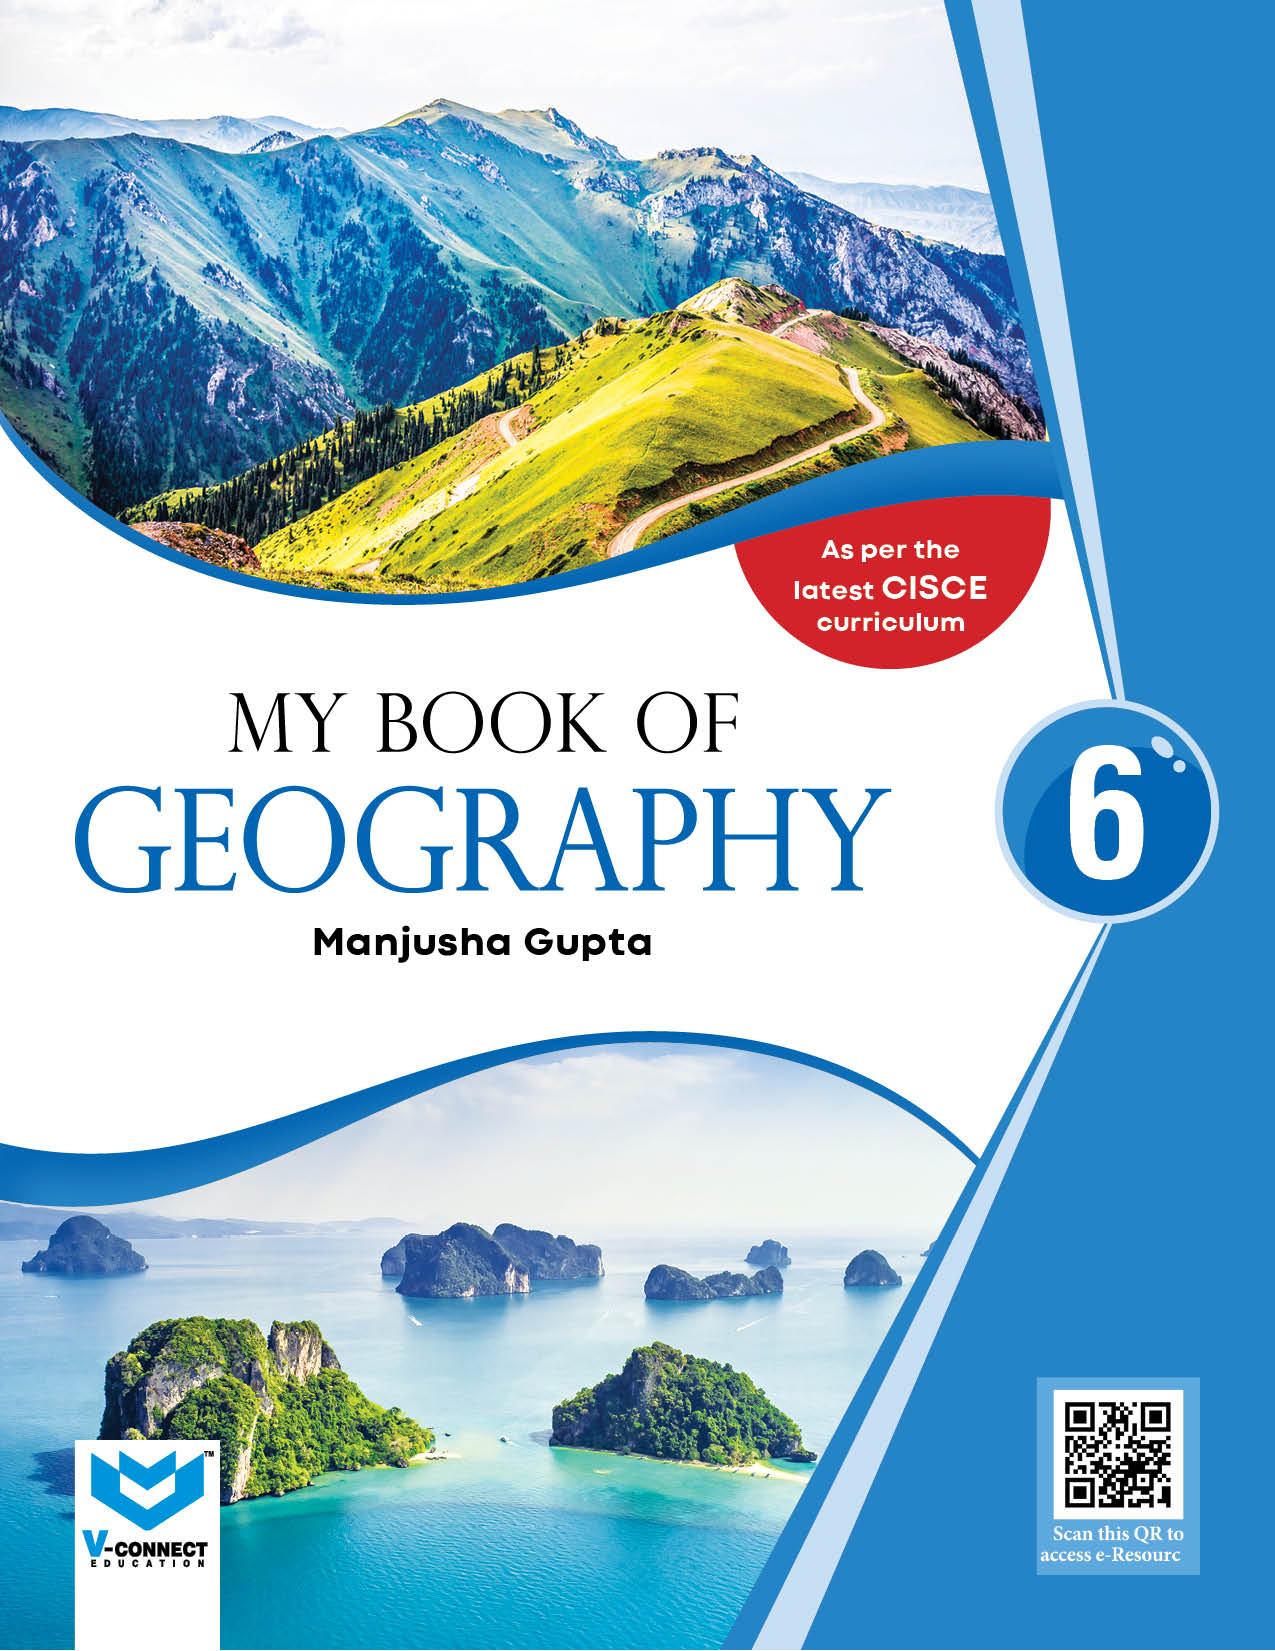 My Book of Geography-6